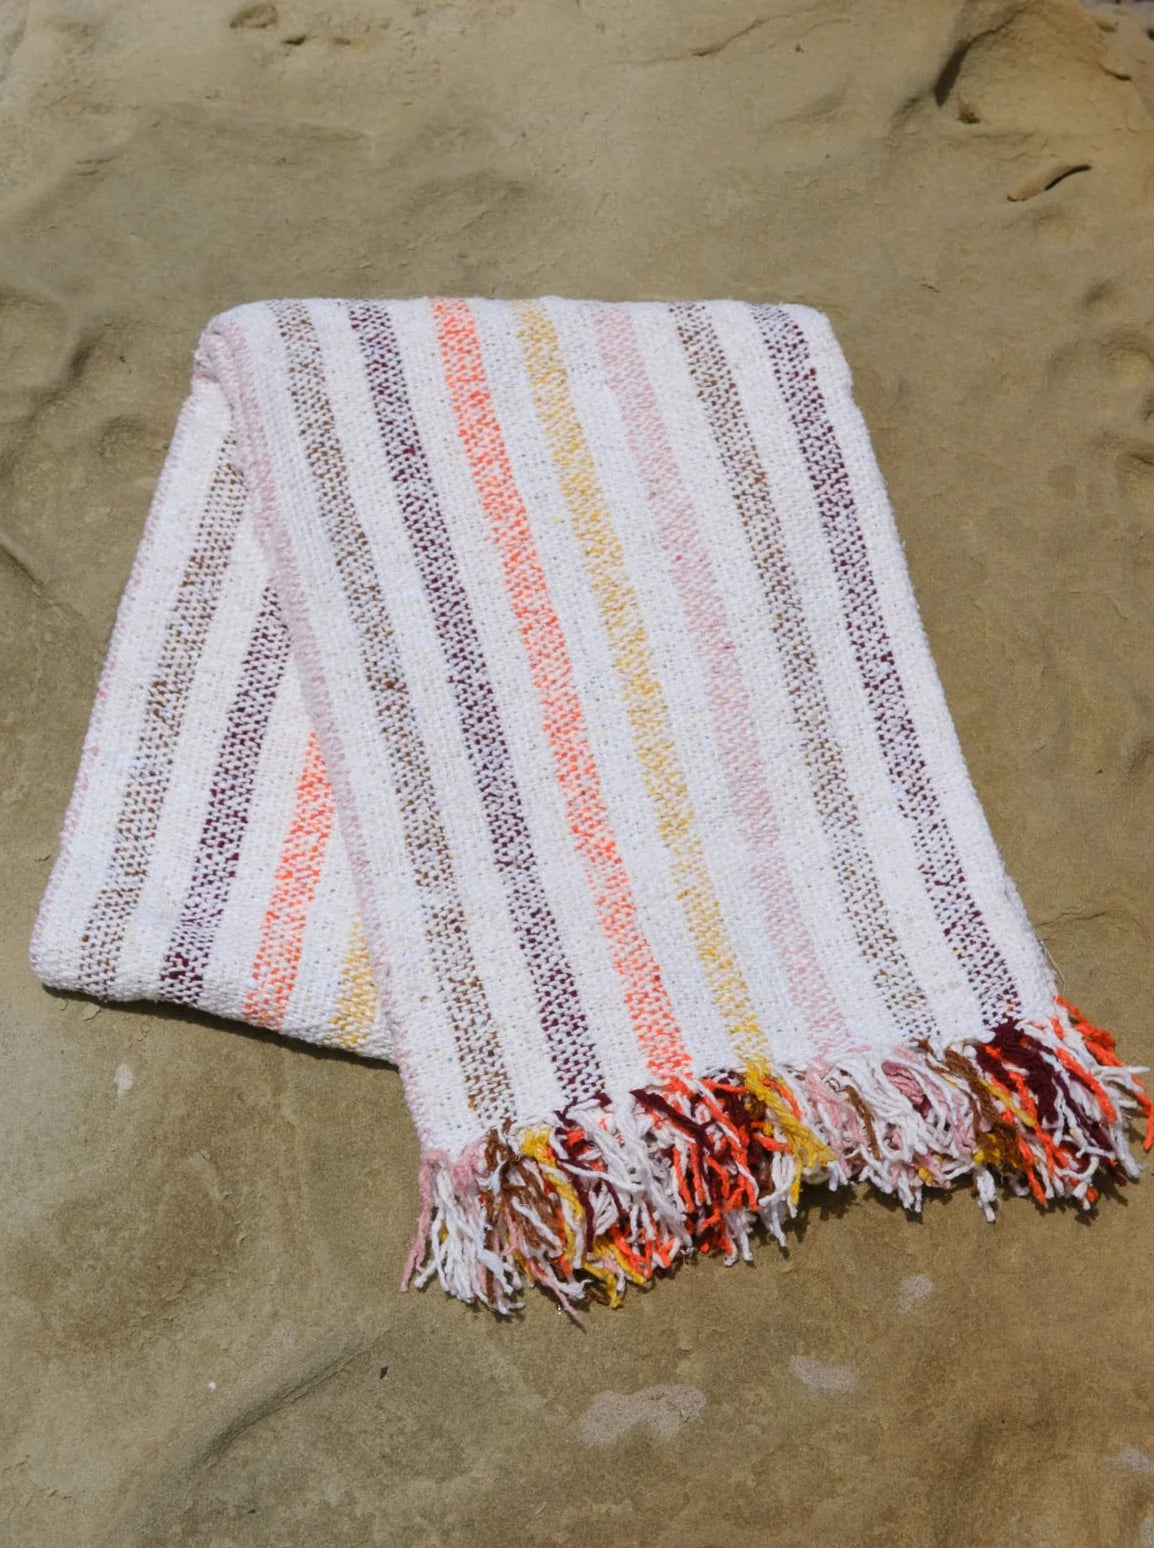 Recycled Beach Throws